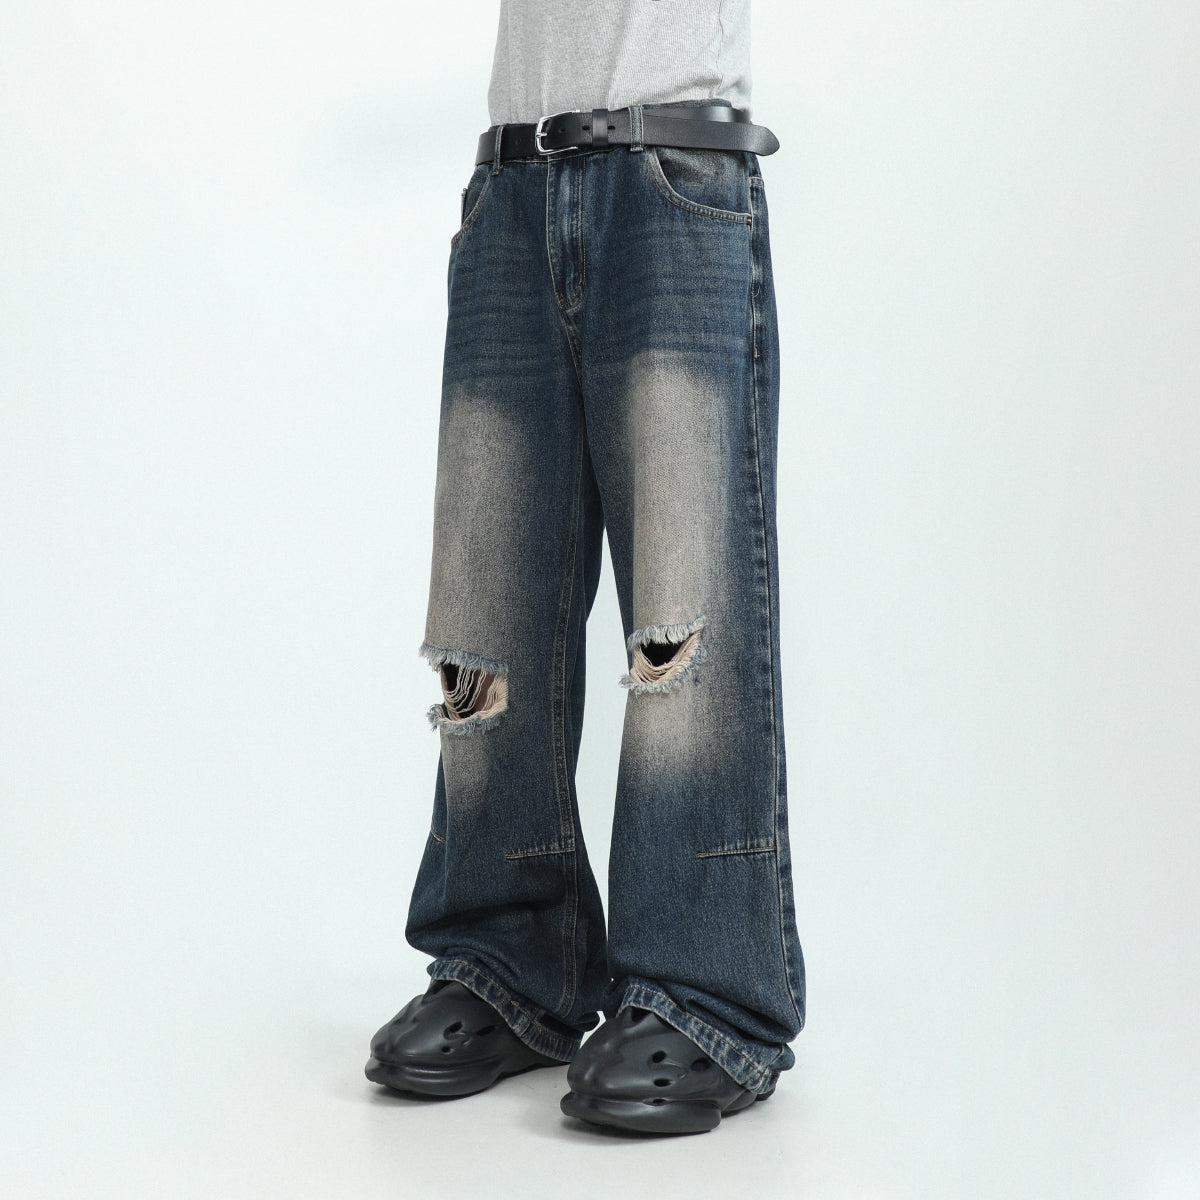 Ripped Knee Jeans Korean Street Fashion Jeans By Mr Nearly Shop Online at OH Vault